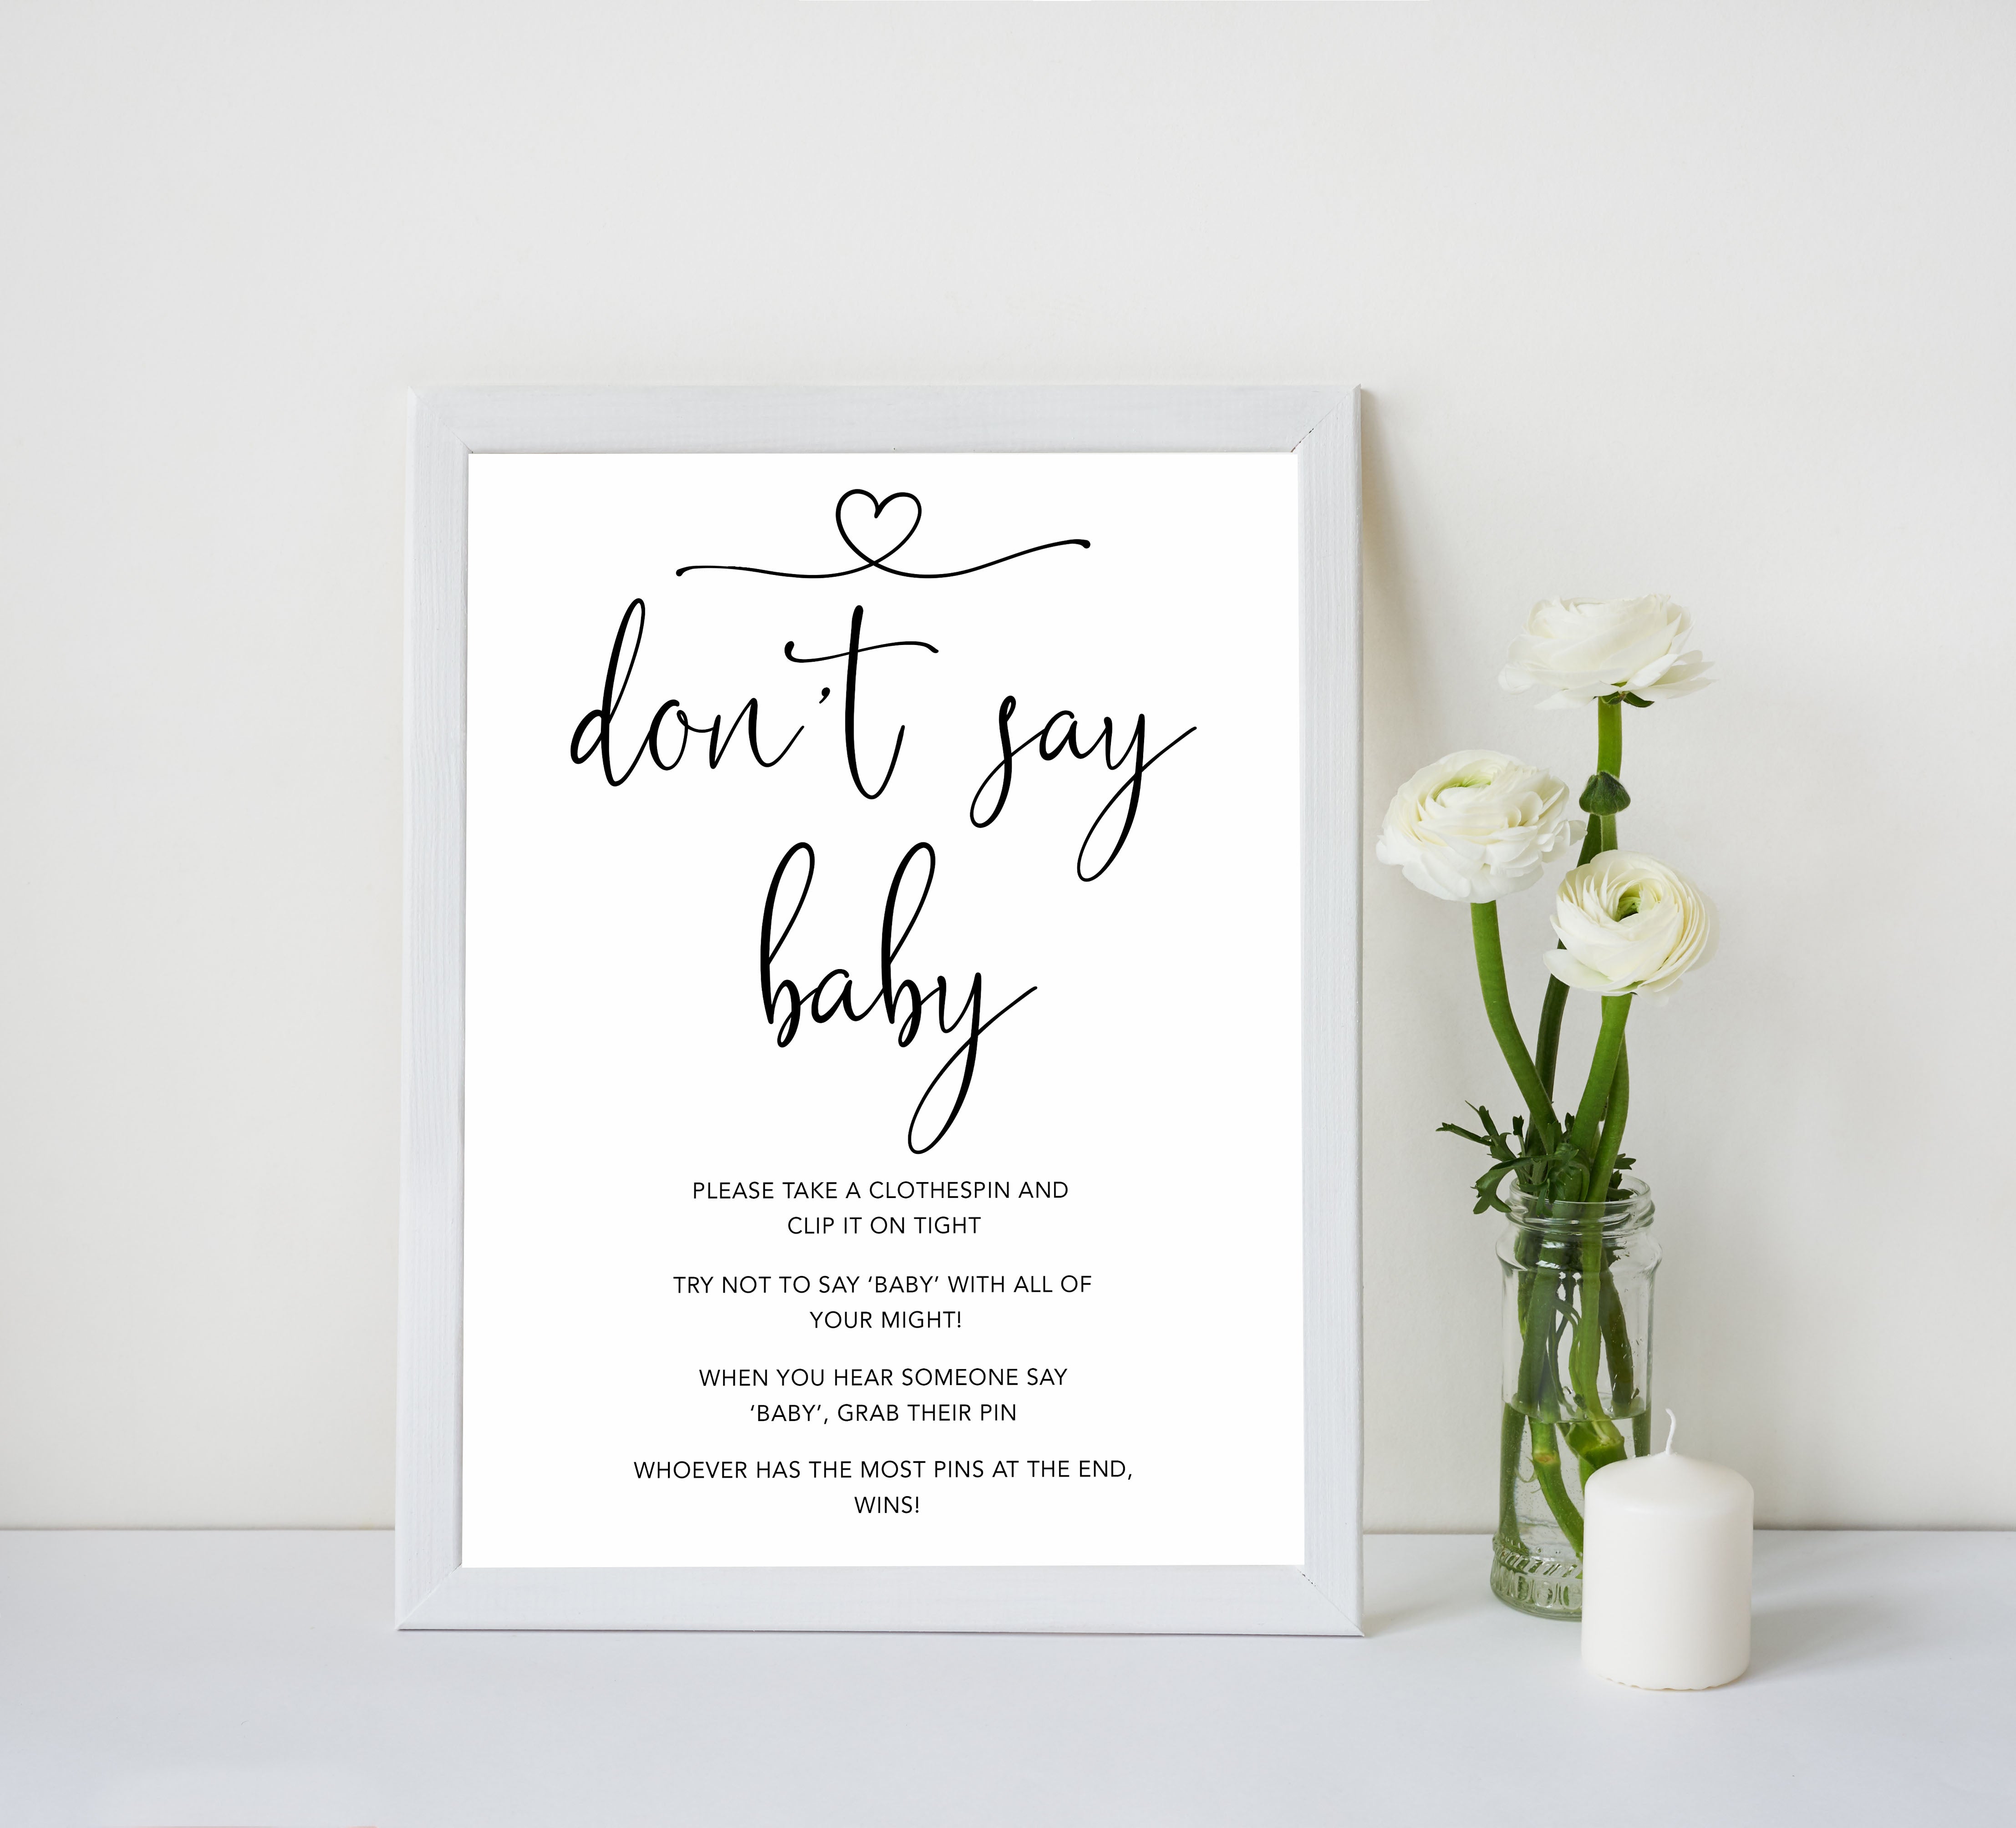 Minimalist baby shower games, dont say baby baby games, 10 baby game bundles, fun baby games, printable baby games, top baby games, popular baby games, labor or porn games, neutral baby games, gender reveal games